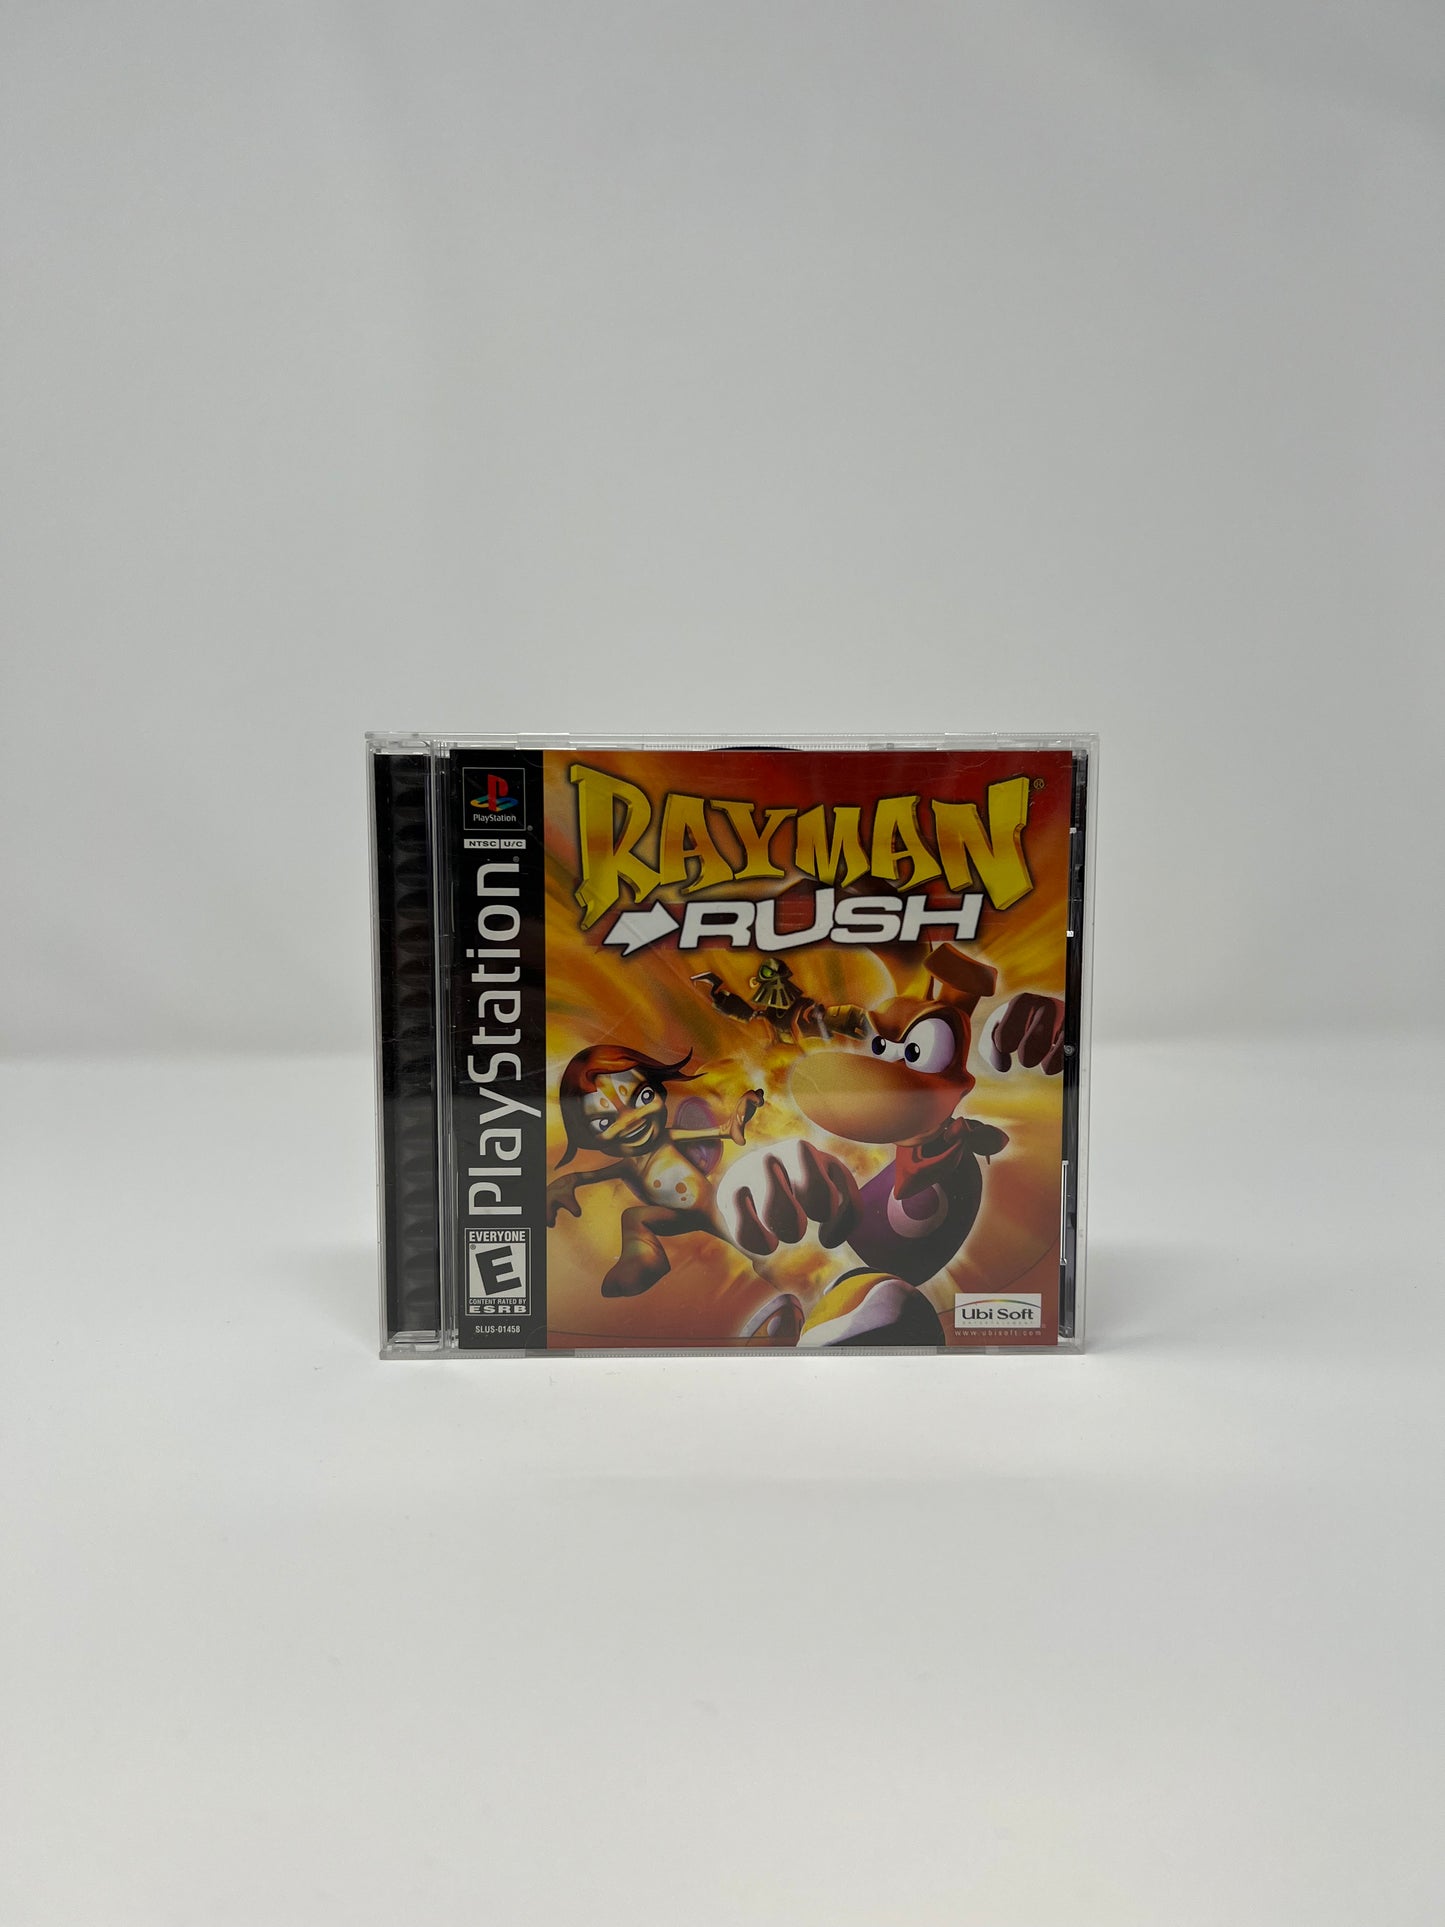 Rayman Rush - PS1 Game - Used